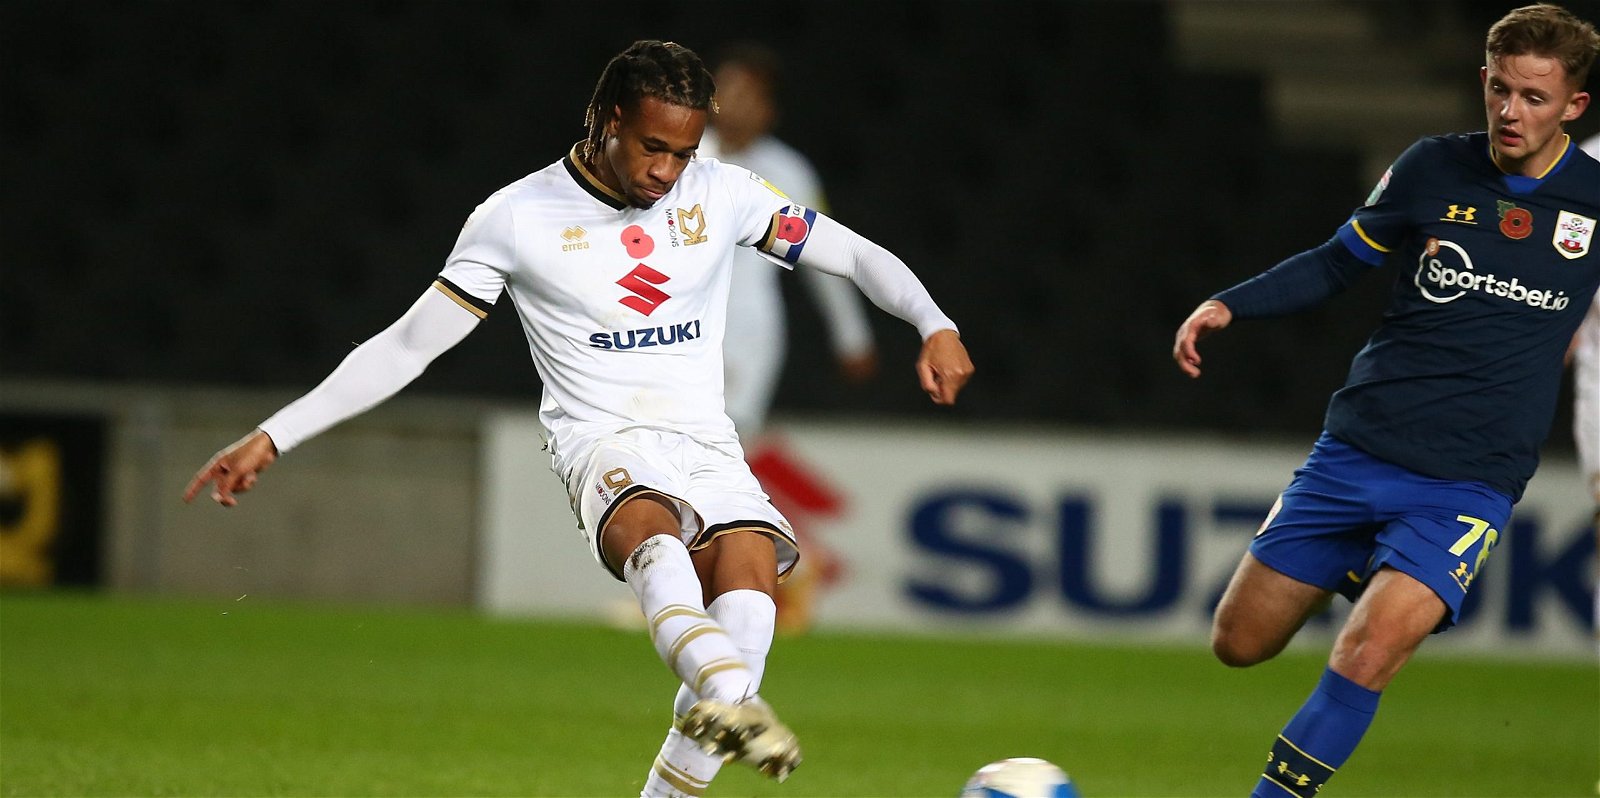 MK Dons, MK Dons man being chased by Championship clubs